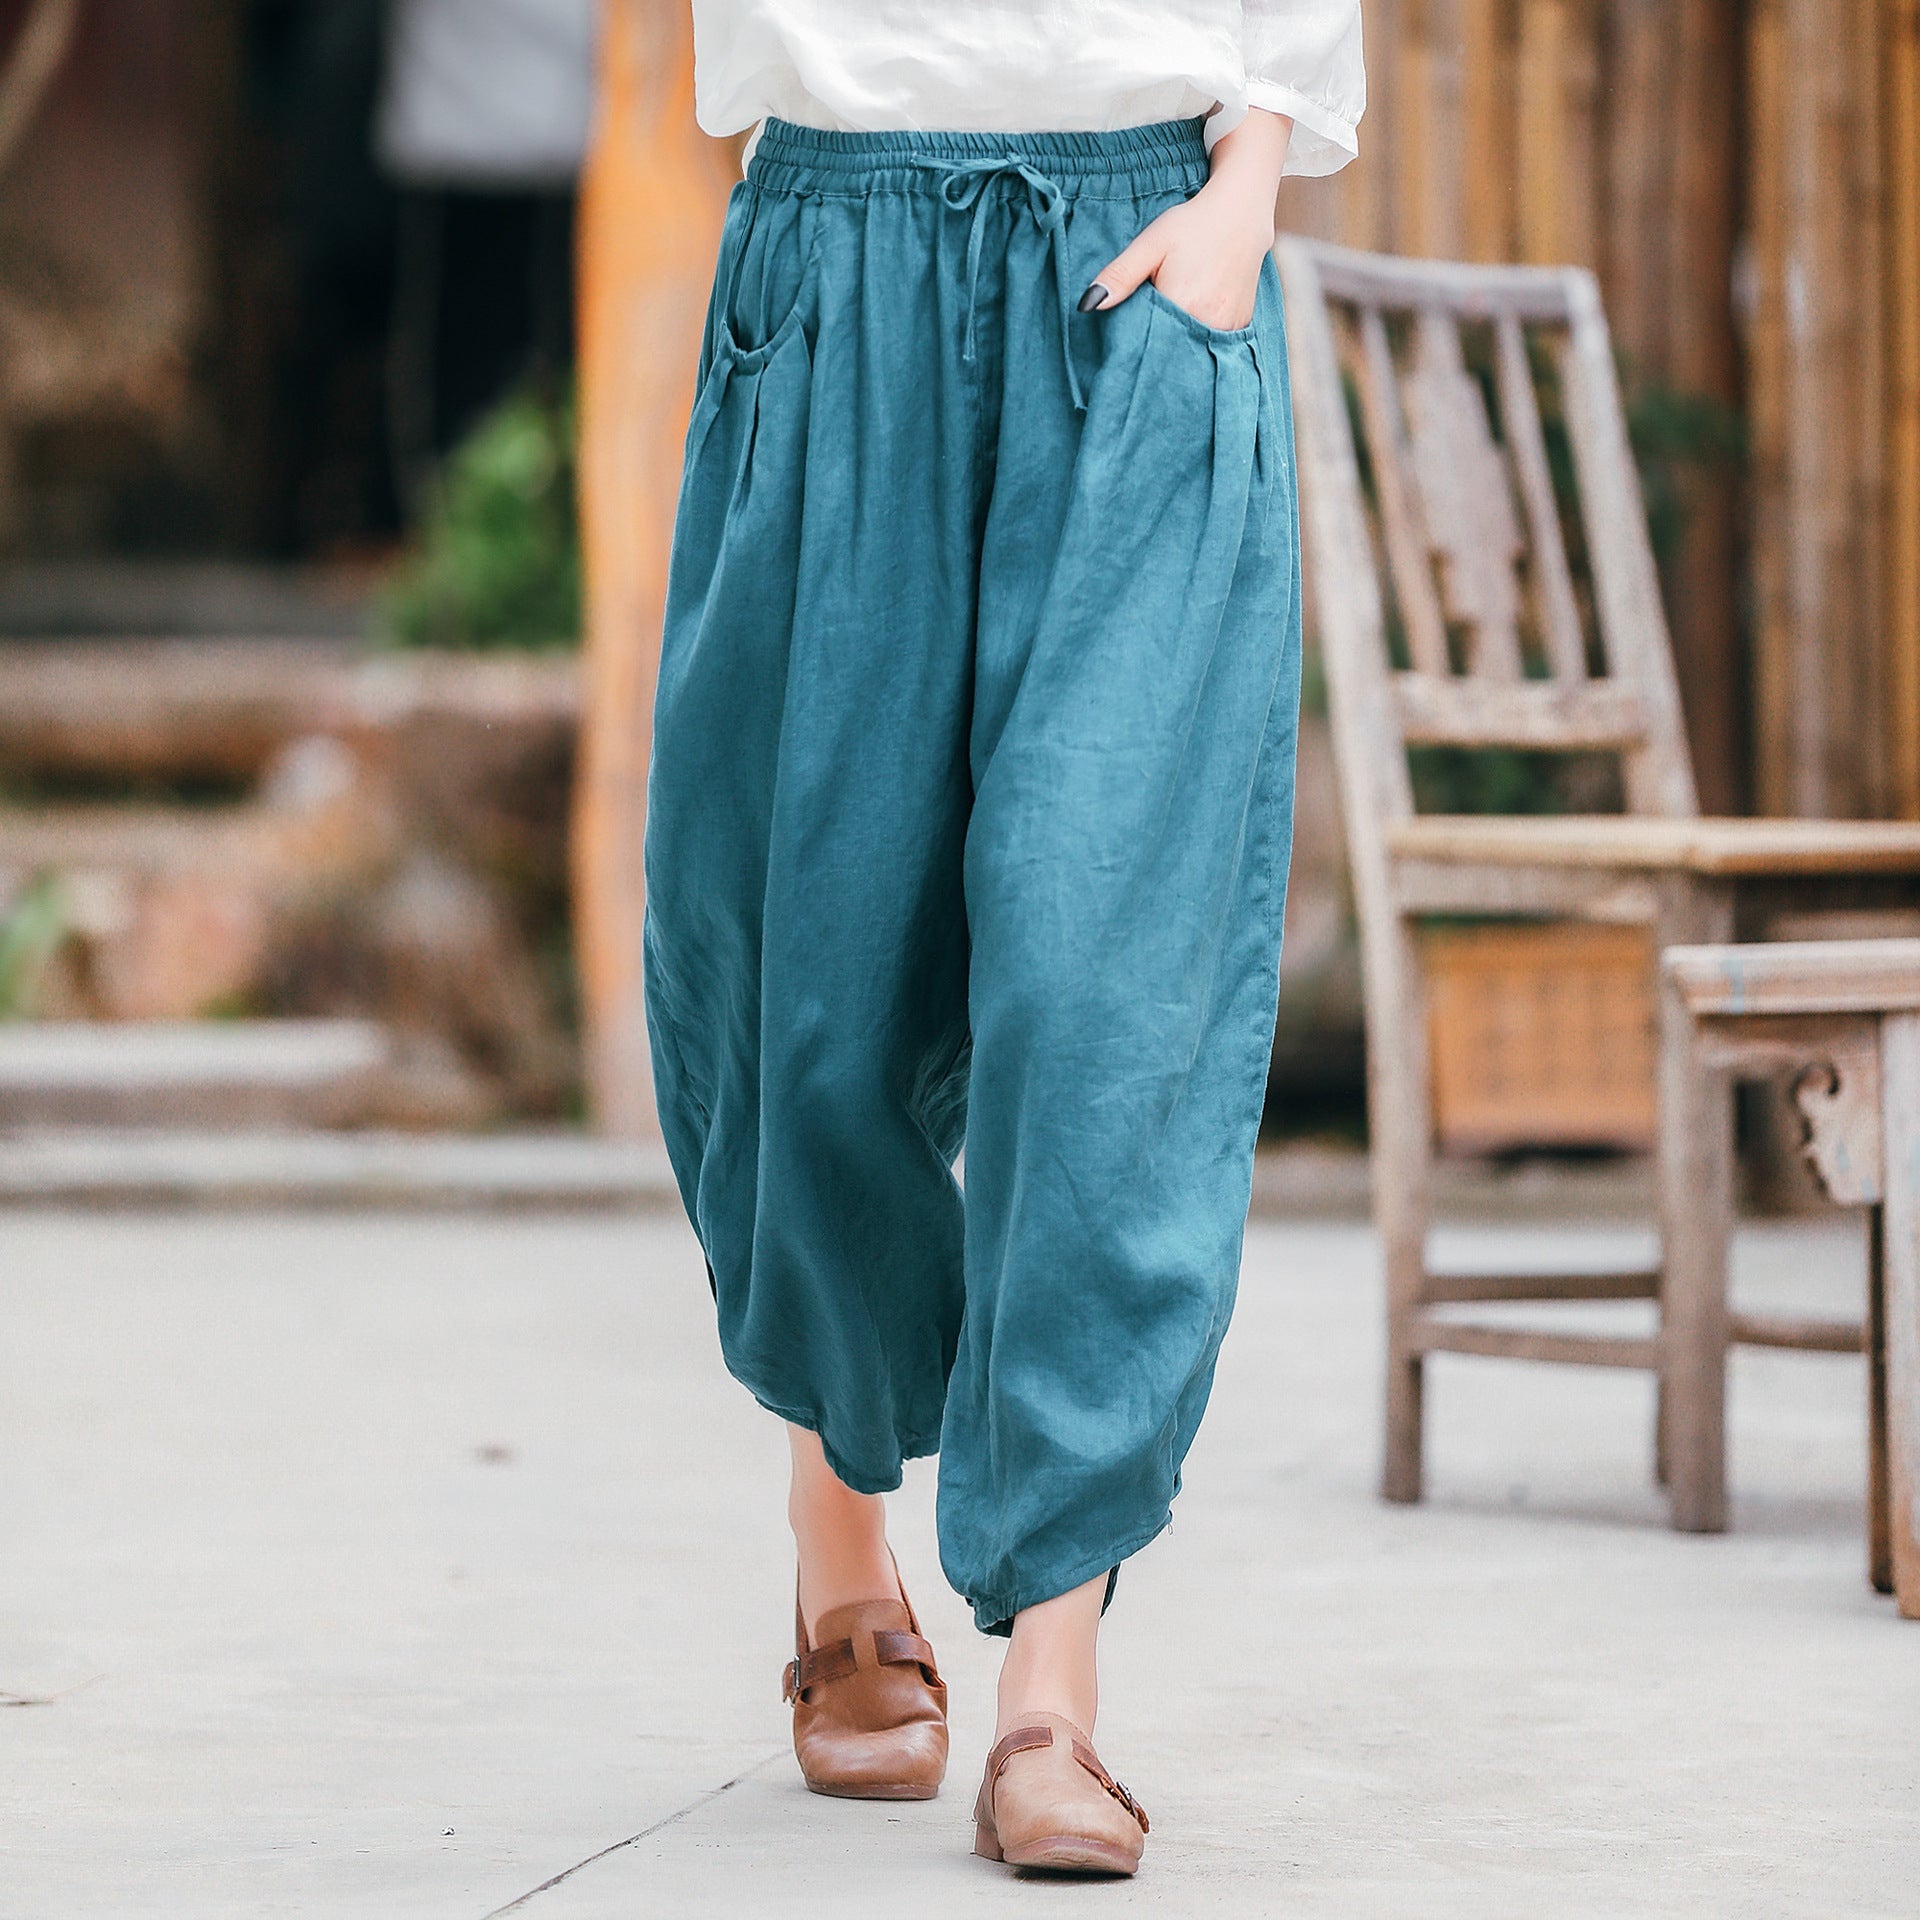 Ethnic Linen Elastic Waist Casual Pants for Women-Pants-Blue-One Size 45-65kg-Free Shipping Leatheretro